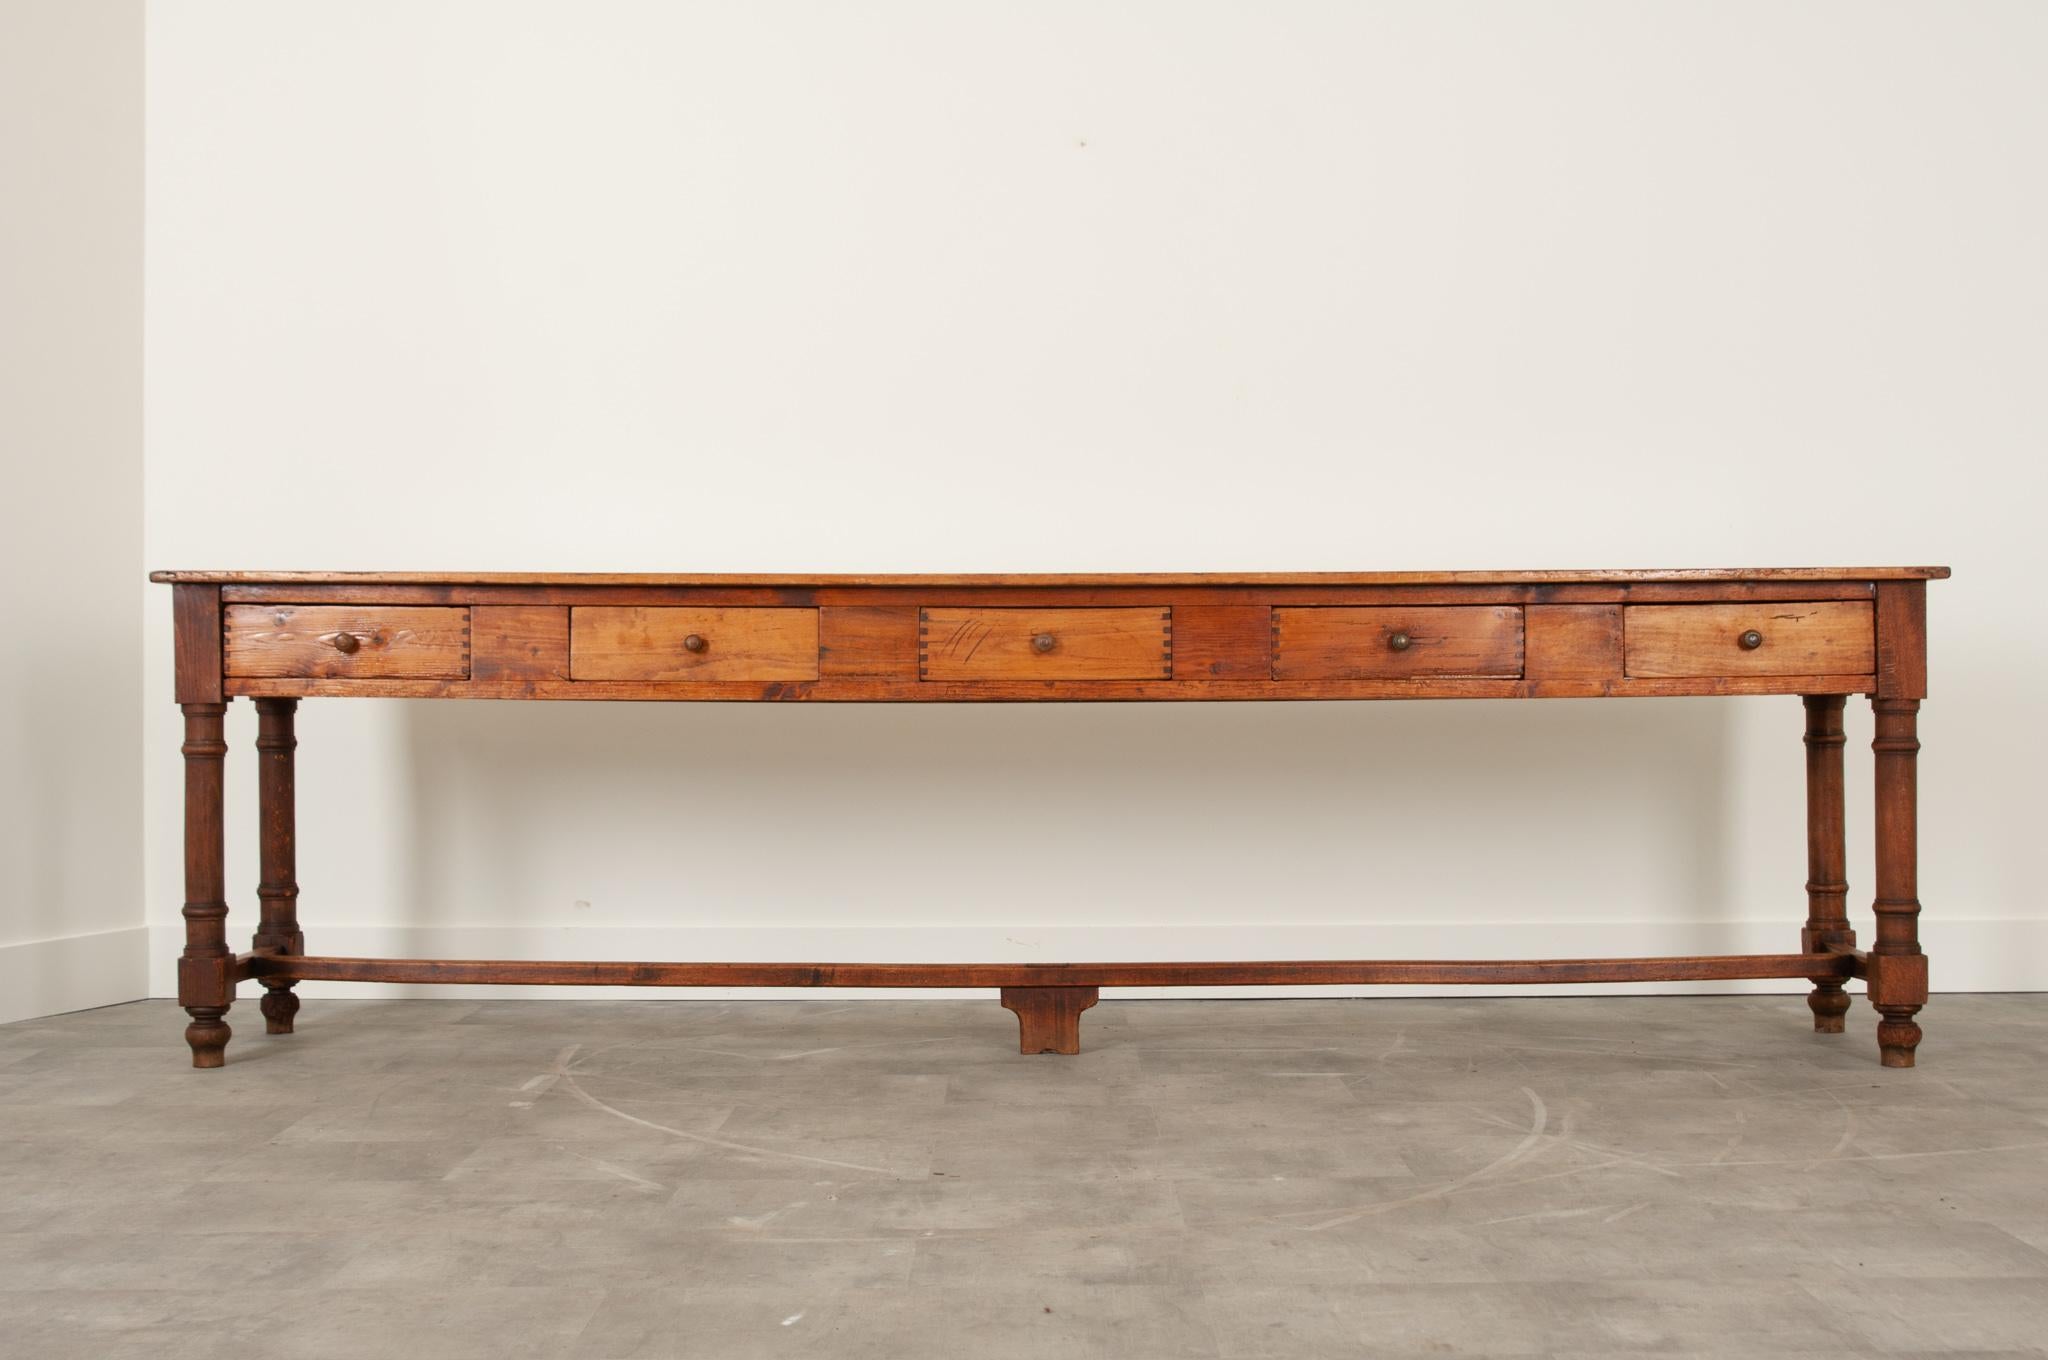 A massive long and narrow work table with 5 drawers that can be pulled out in both directions. Perfect for any hallway, center table or behind a sofa, this is the ideal narrow table you’ve been looking for. Made of oak and pine, this mixed wood